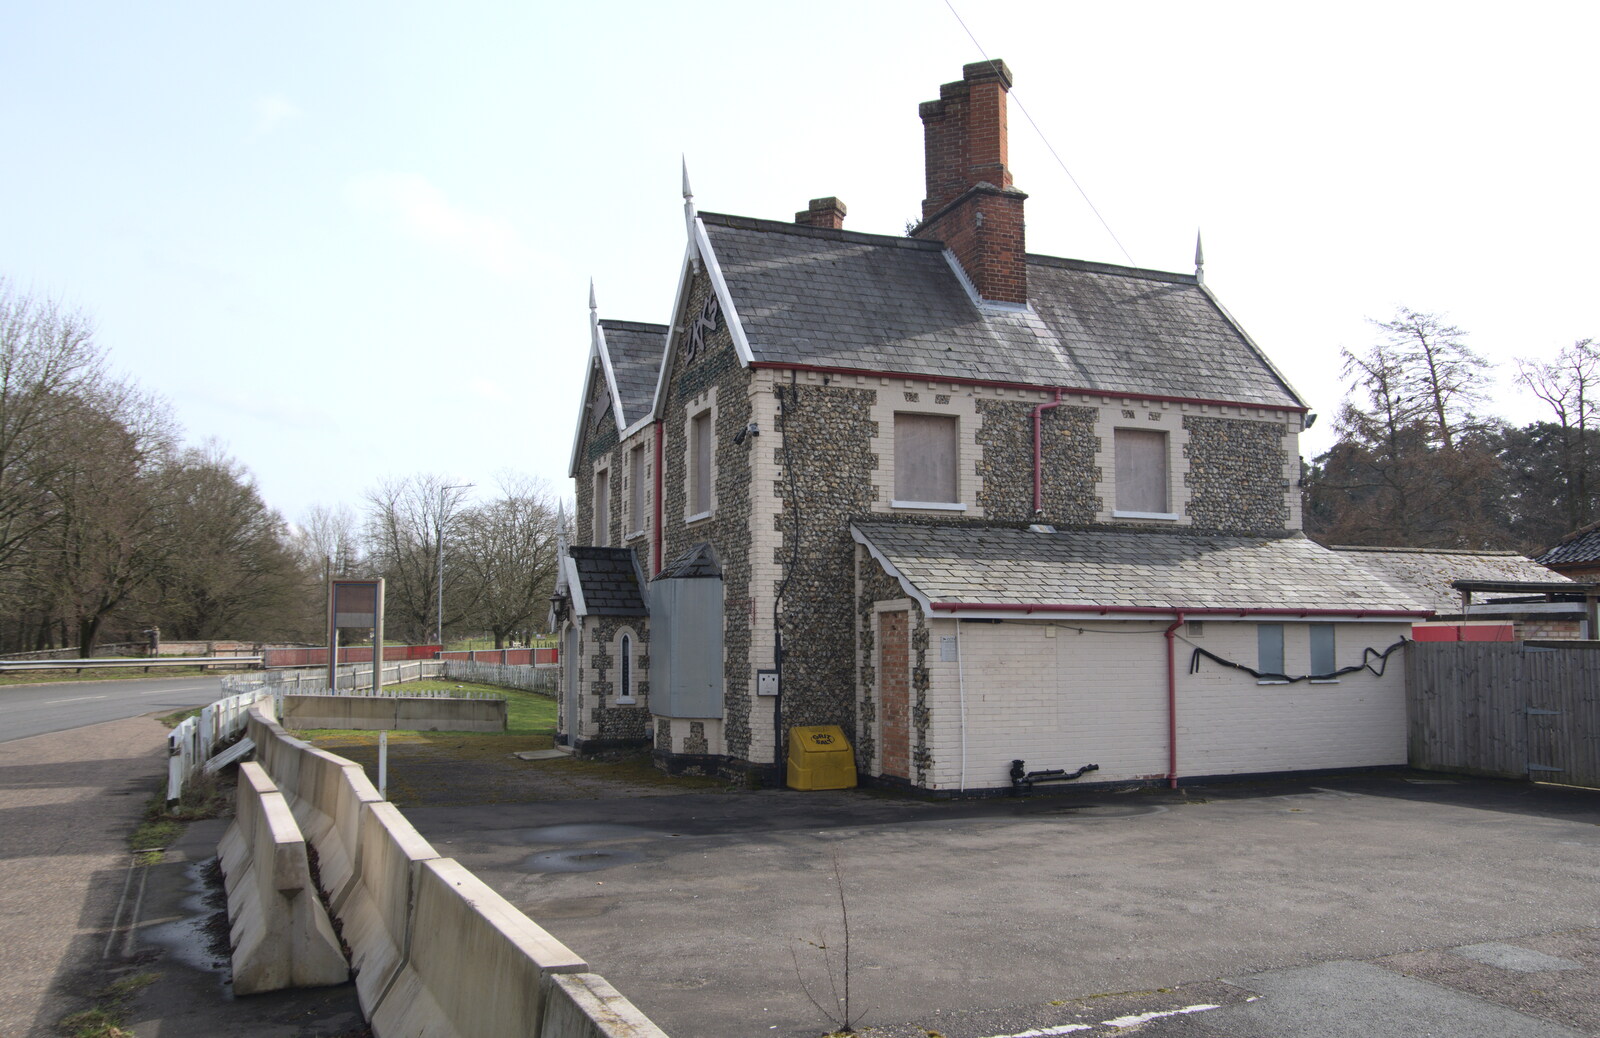 A derelict pub on the roundabout from A Postcard from Thetford, Norfolk - 15th March 2023